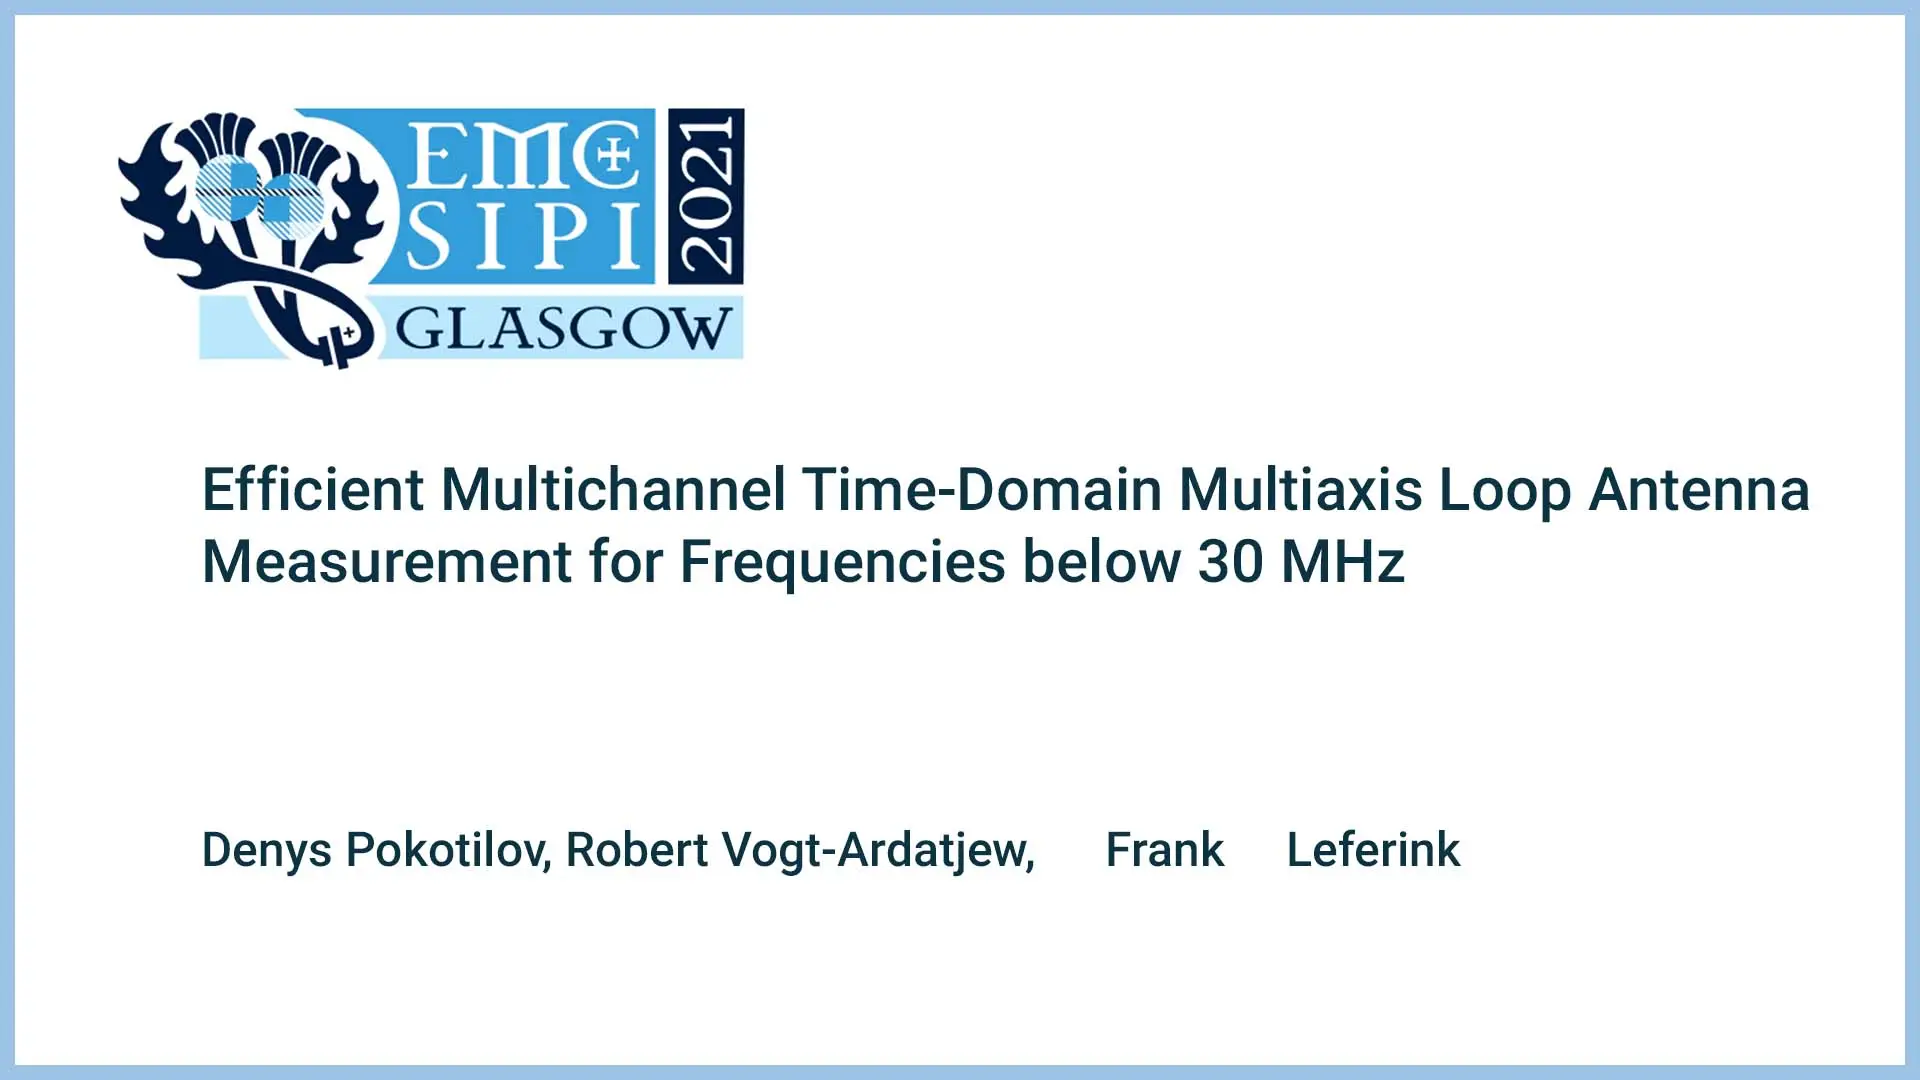 Efficient Multichannel Time-Domain Multiaxis Loop Antenna Measurement for Frequencies below 30 MHz